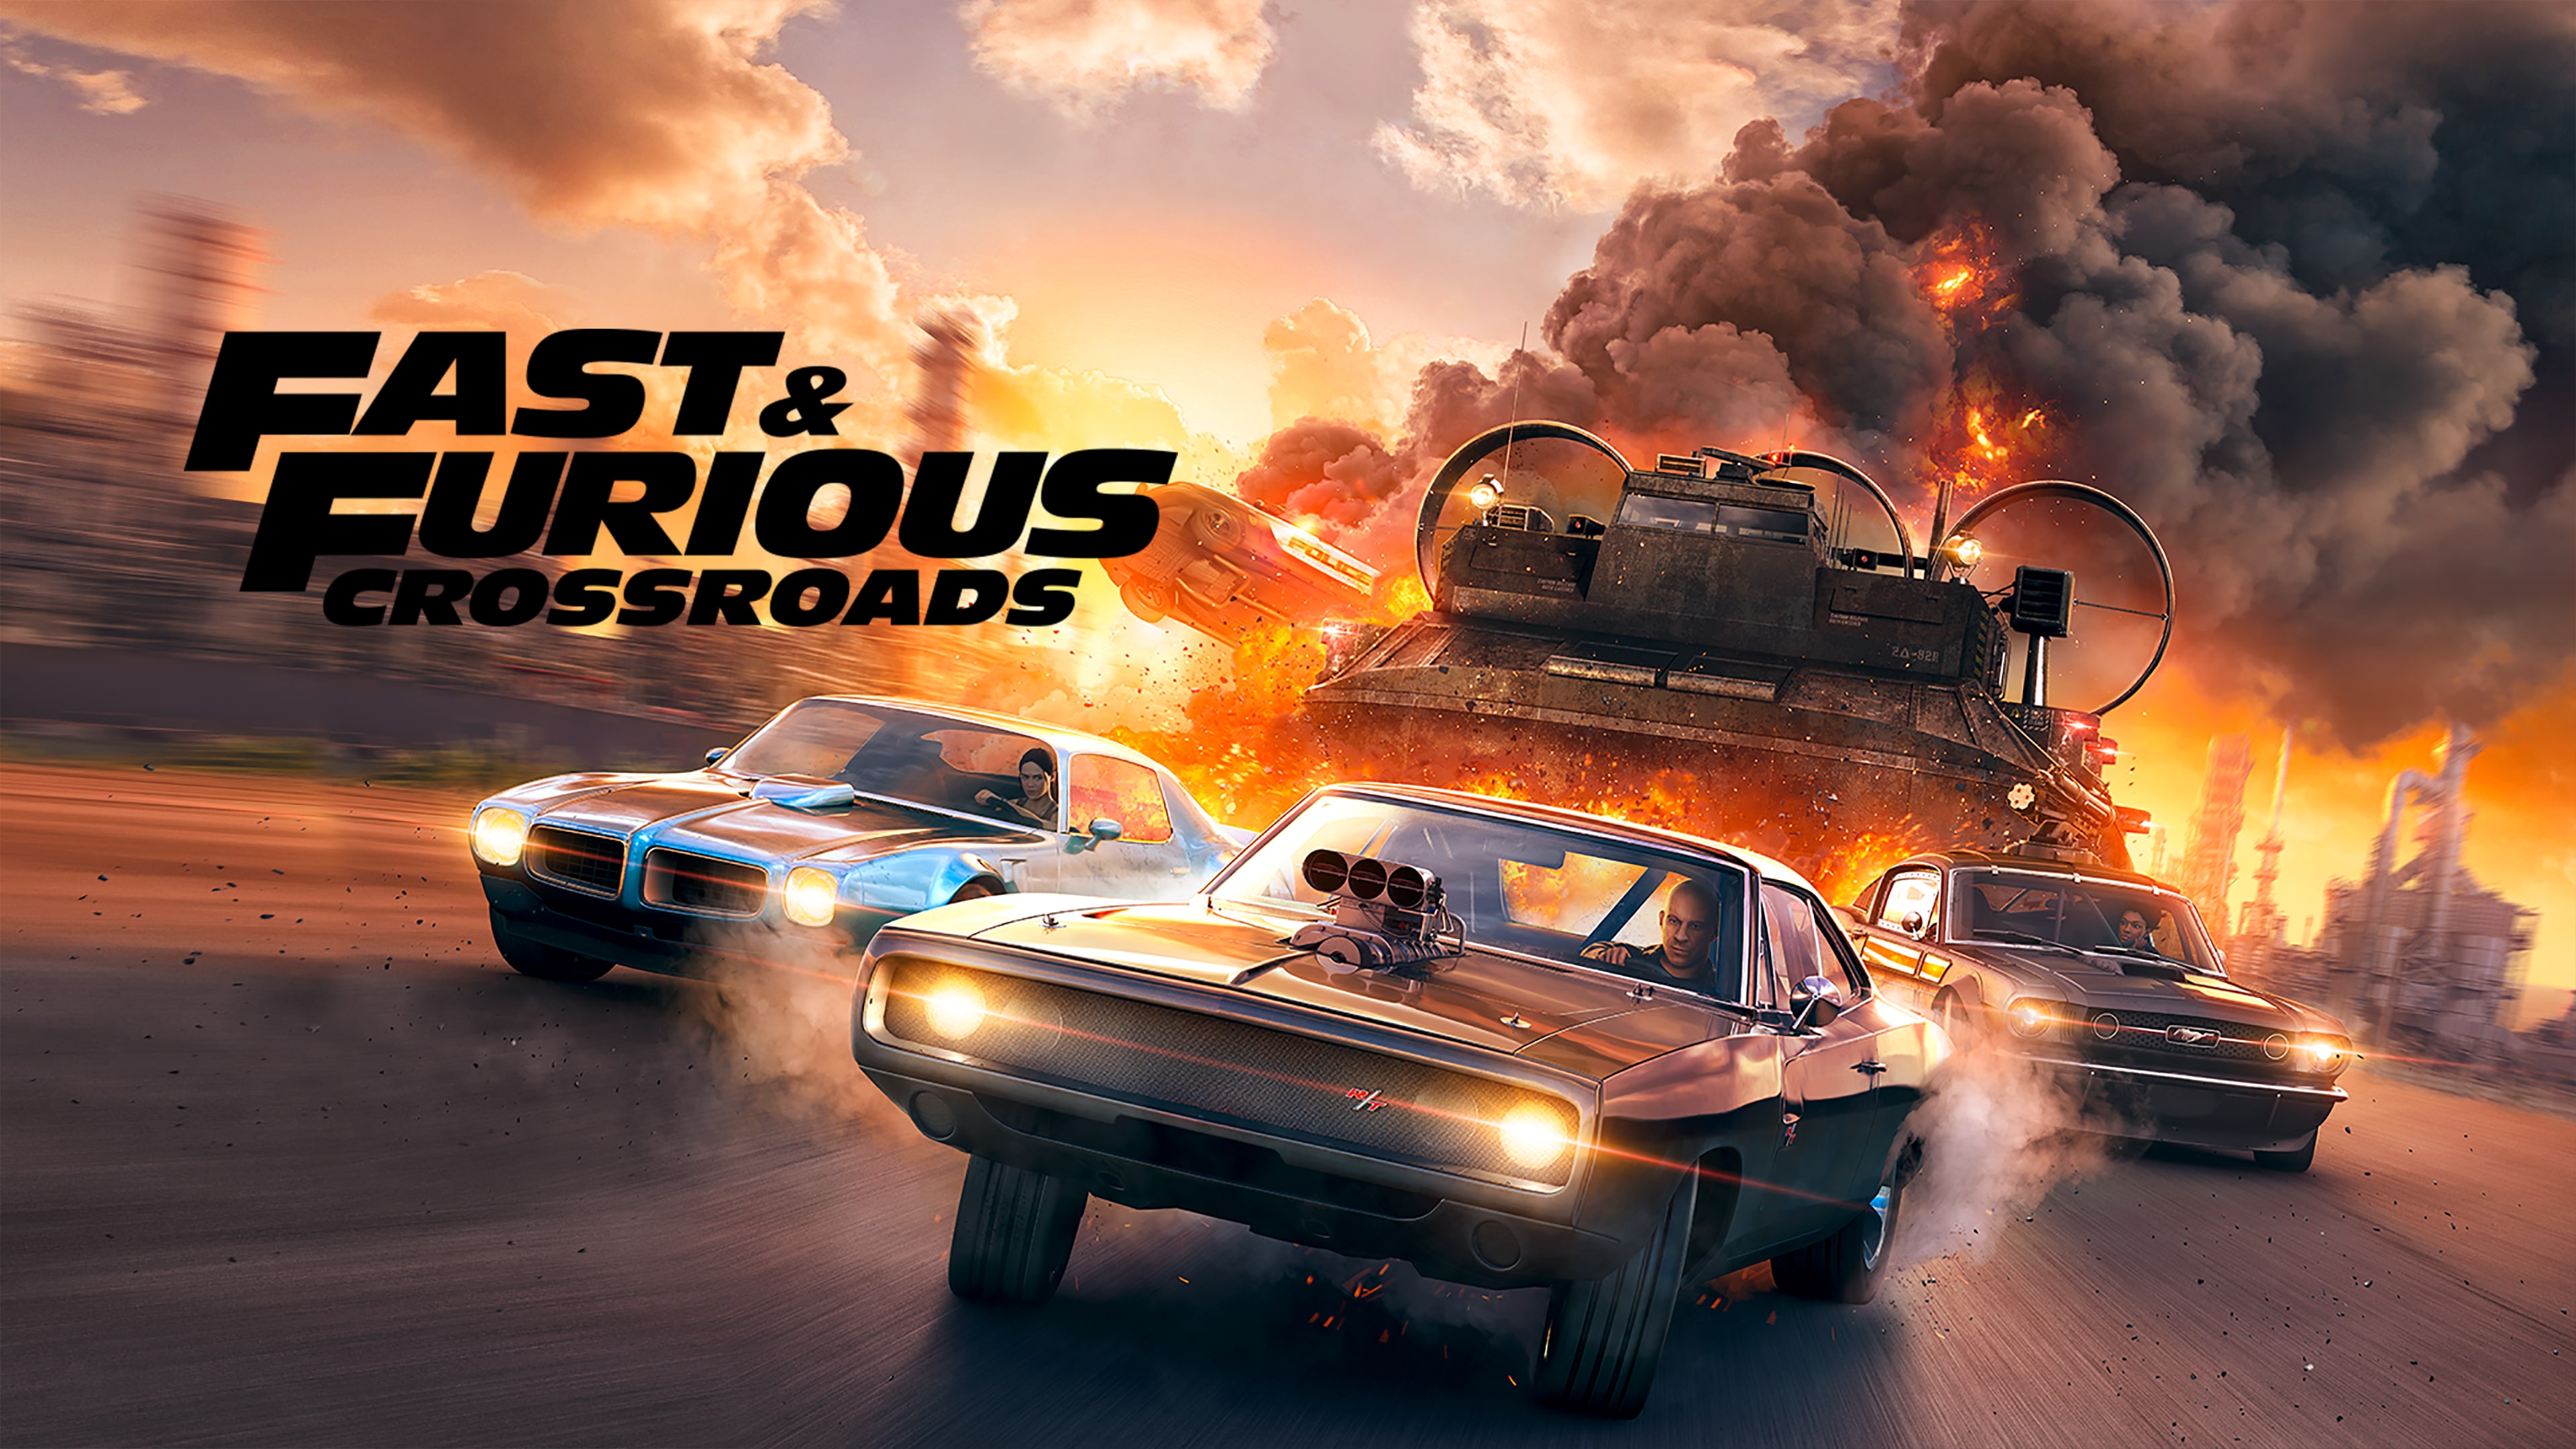 download free fast & furious crossroads